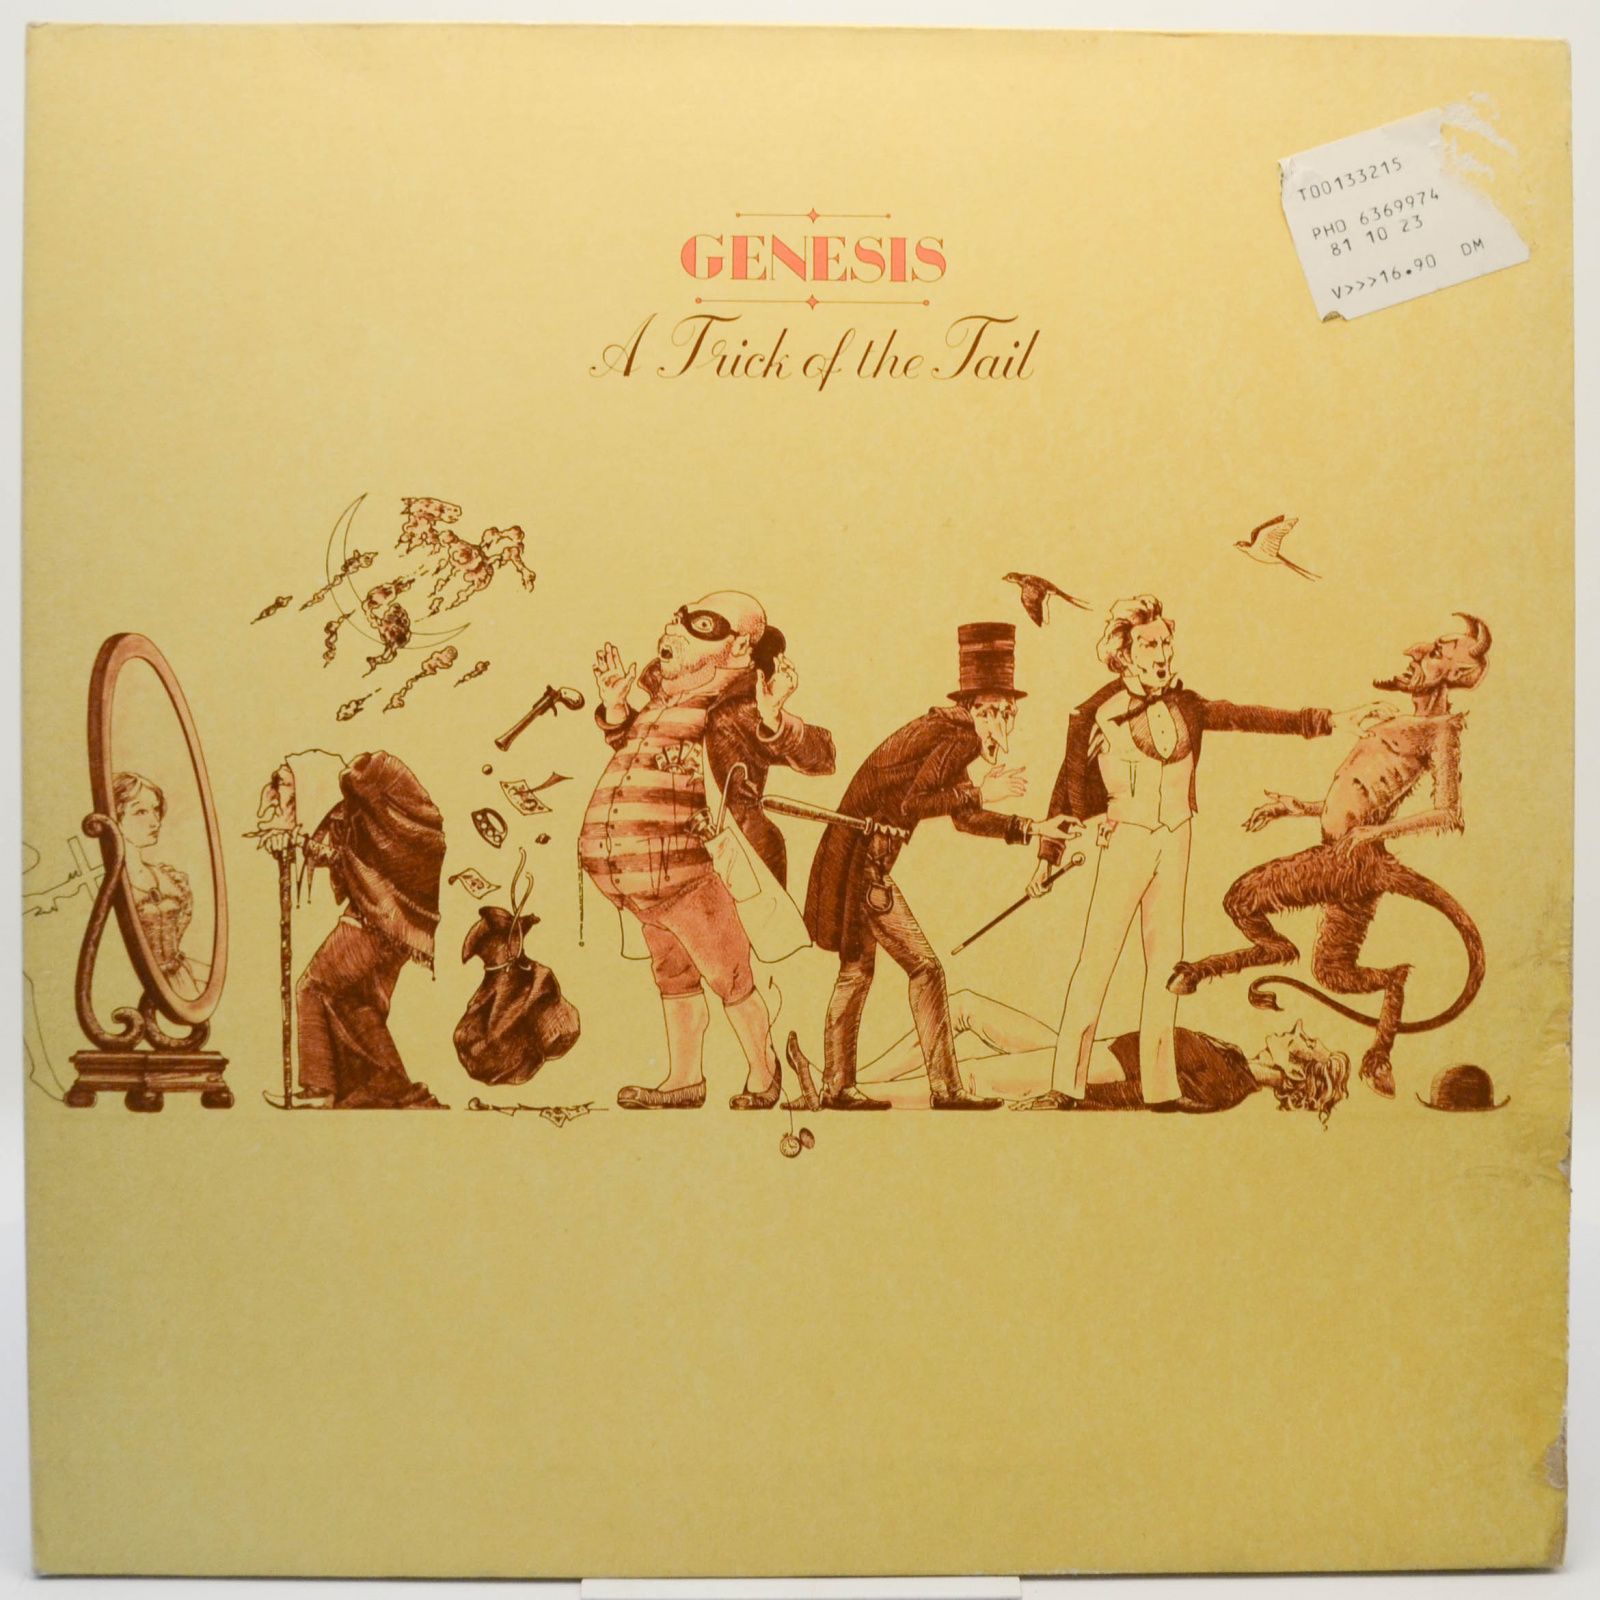 Genesis — A Trick Of The Tail (UK), 1976